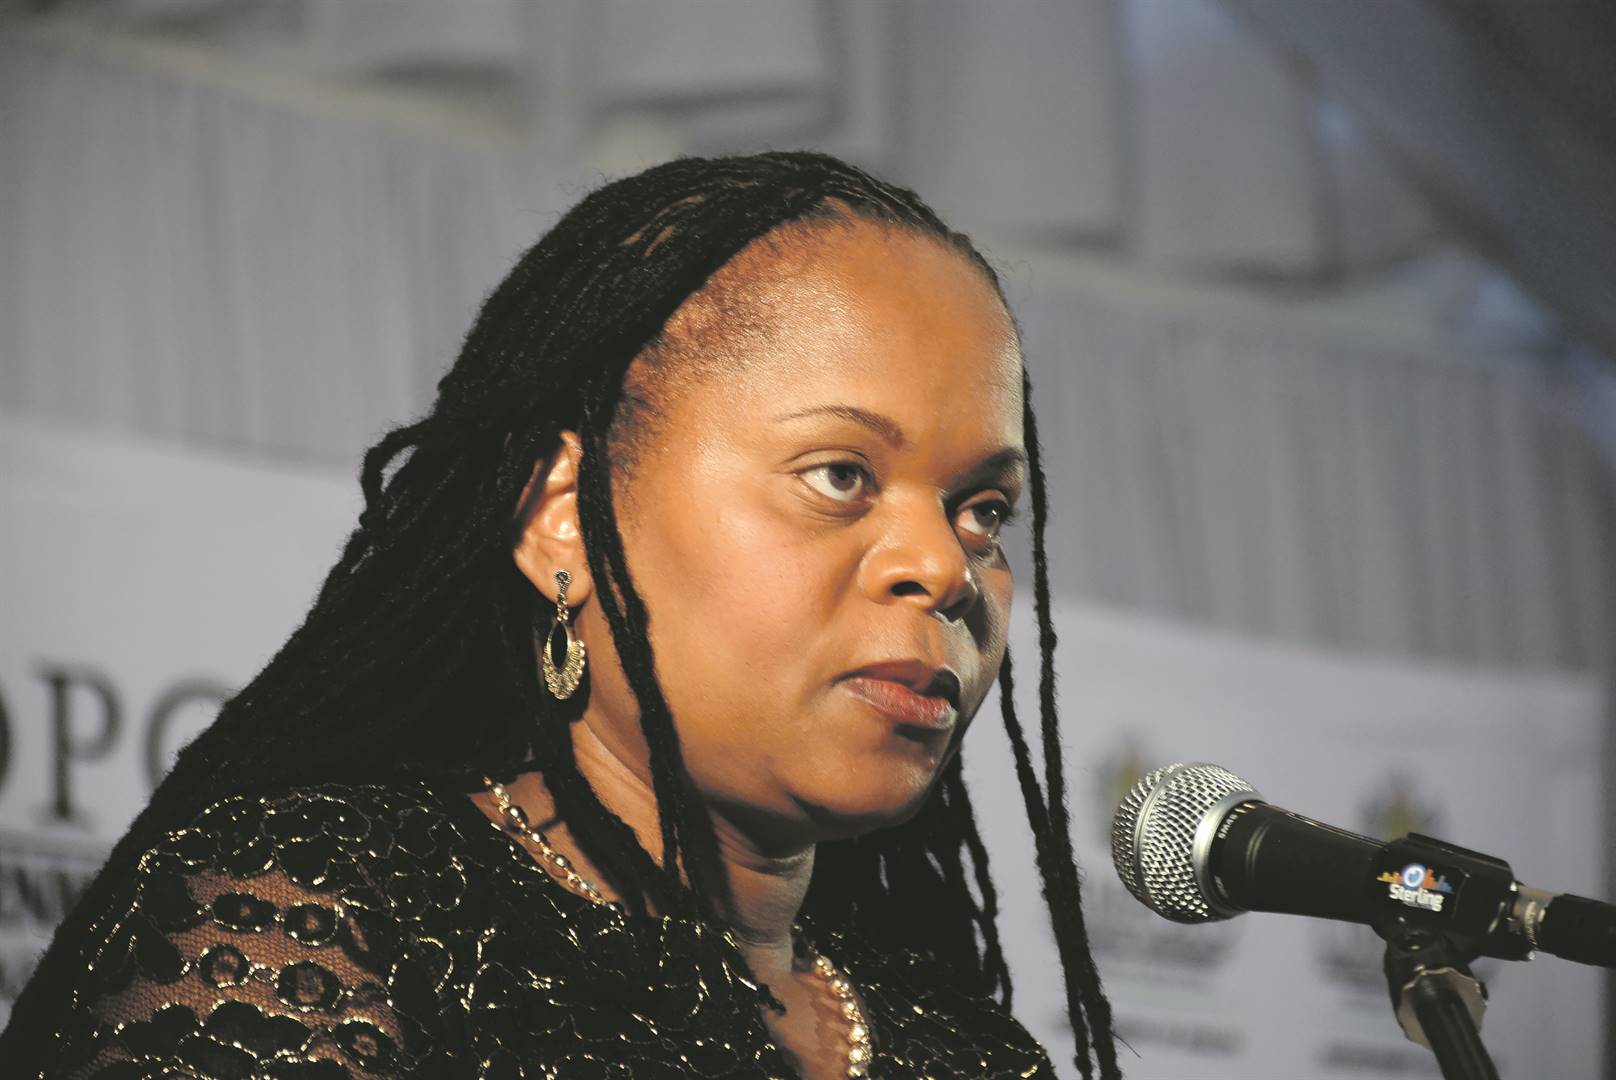 Provincial Health MEC Dr Phophi Ramathuba said the case presented with signs and symptoms, such as rash, lymphadenopathy, muscle ache and fatigue. Photo: Archive